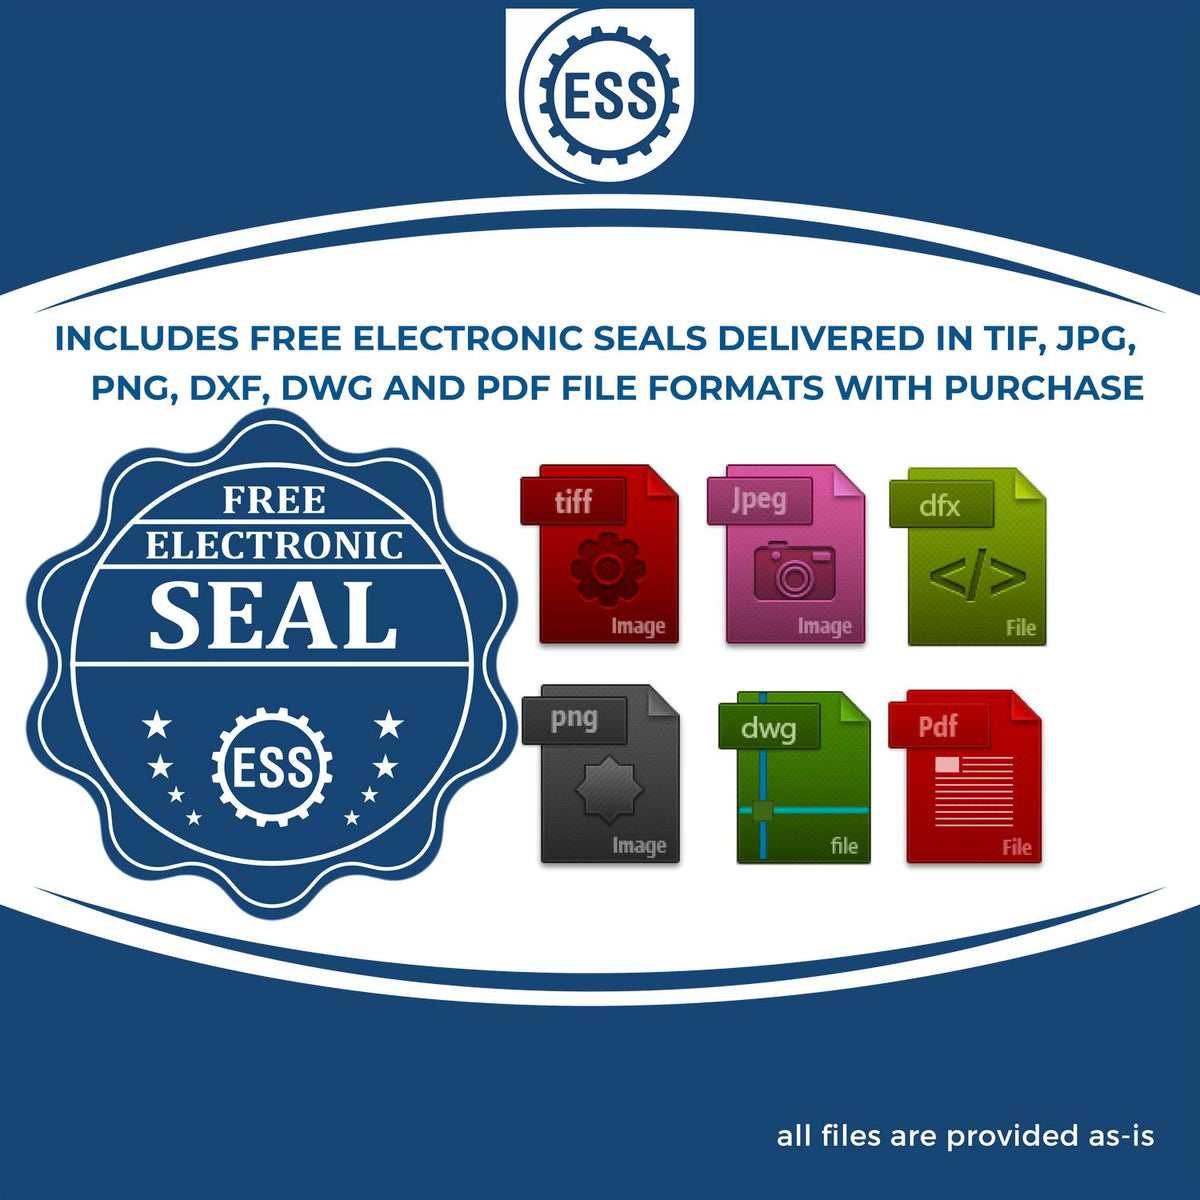 An infographic for the free electronic seal for the MaxLight Premium Pre-Inked Michigan State Seal Notarial Stamp illustrating the different file type icons such as DXF, DWG, TIF, JPG and PNG.